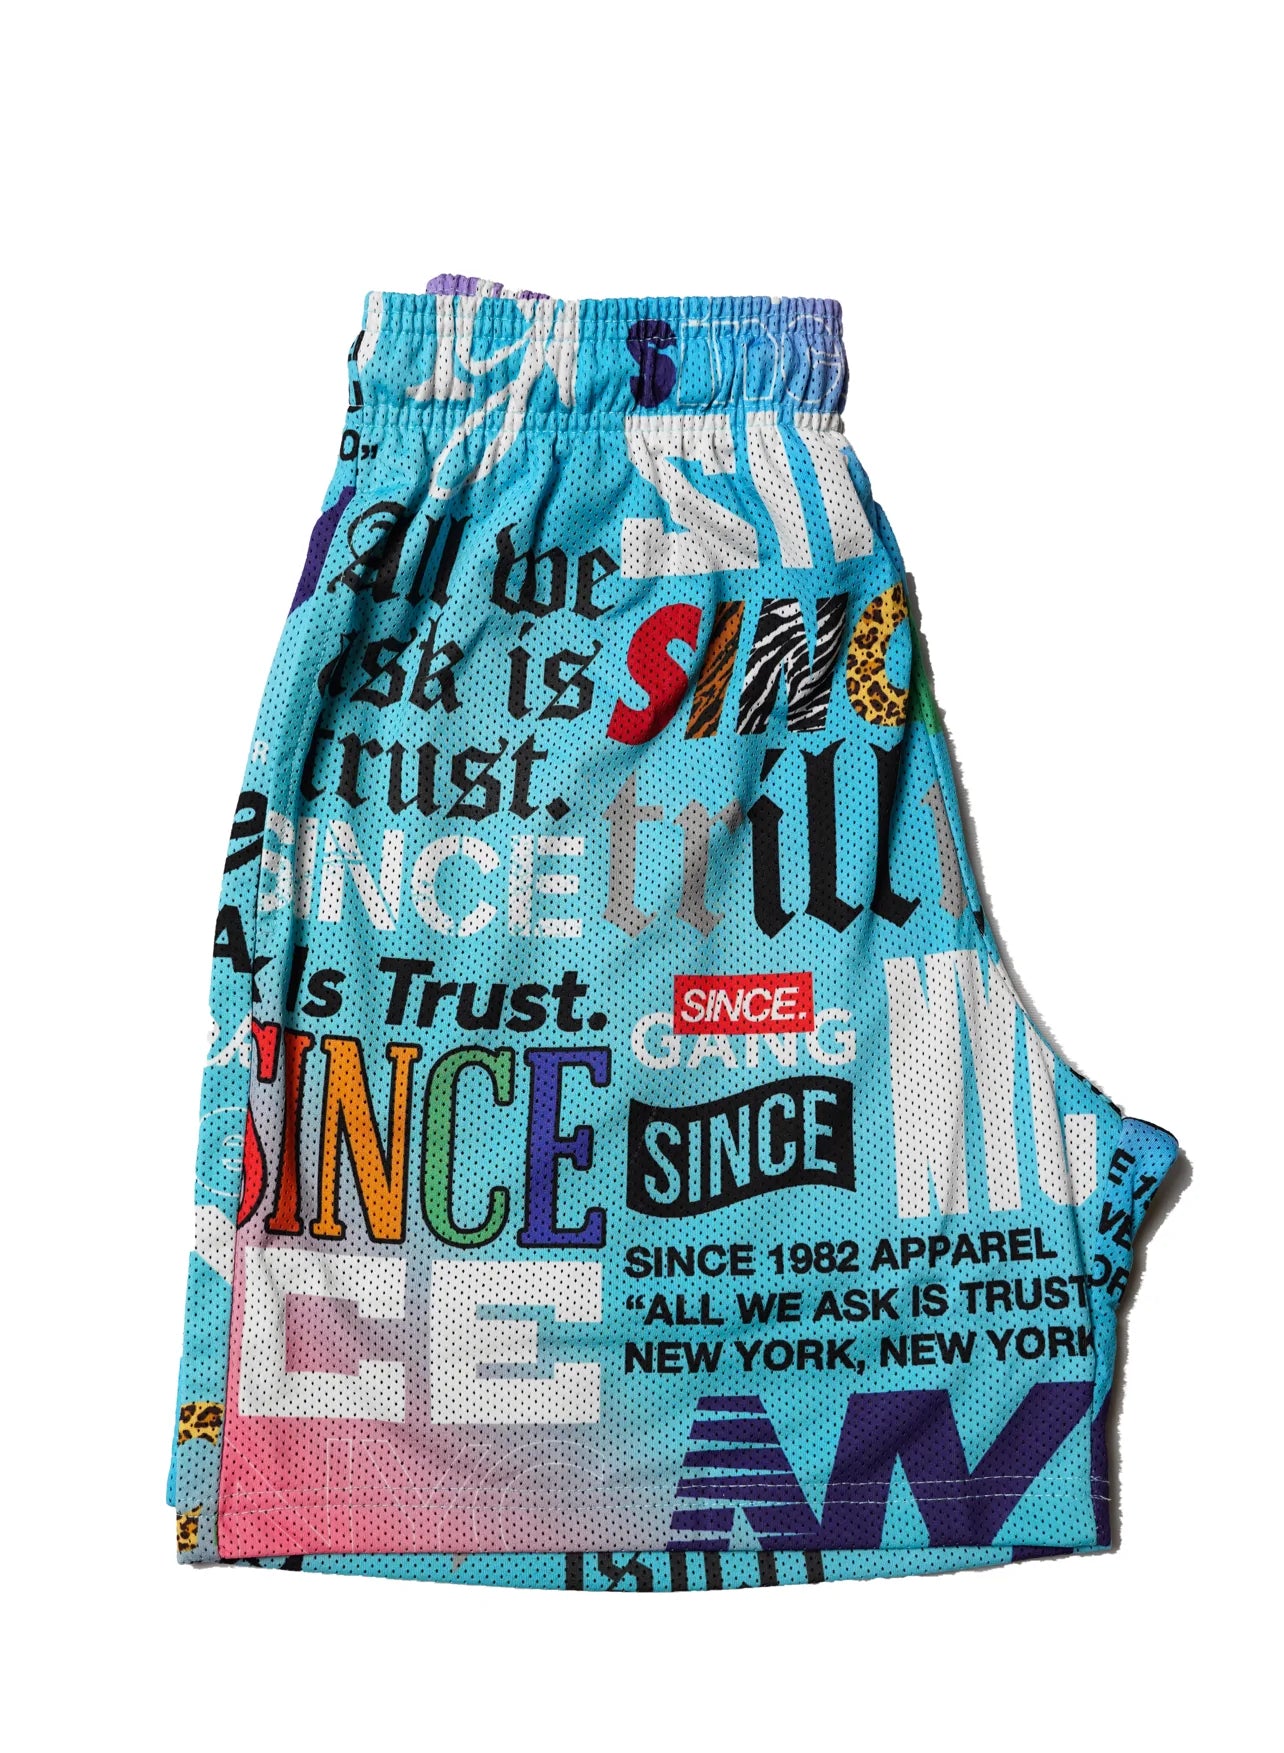 SINCE 1982 “COLLECTION” SHORT